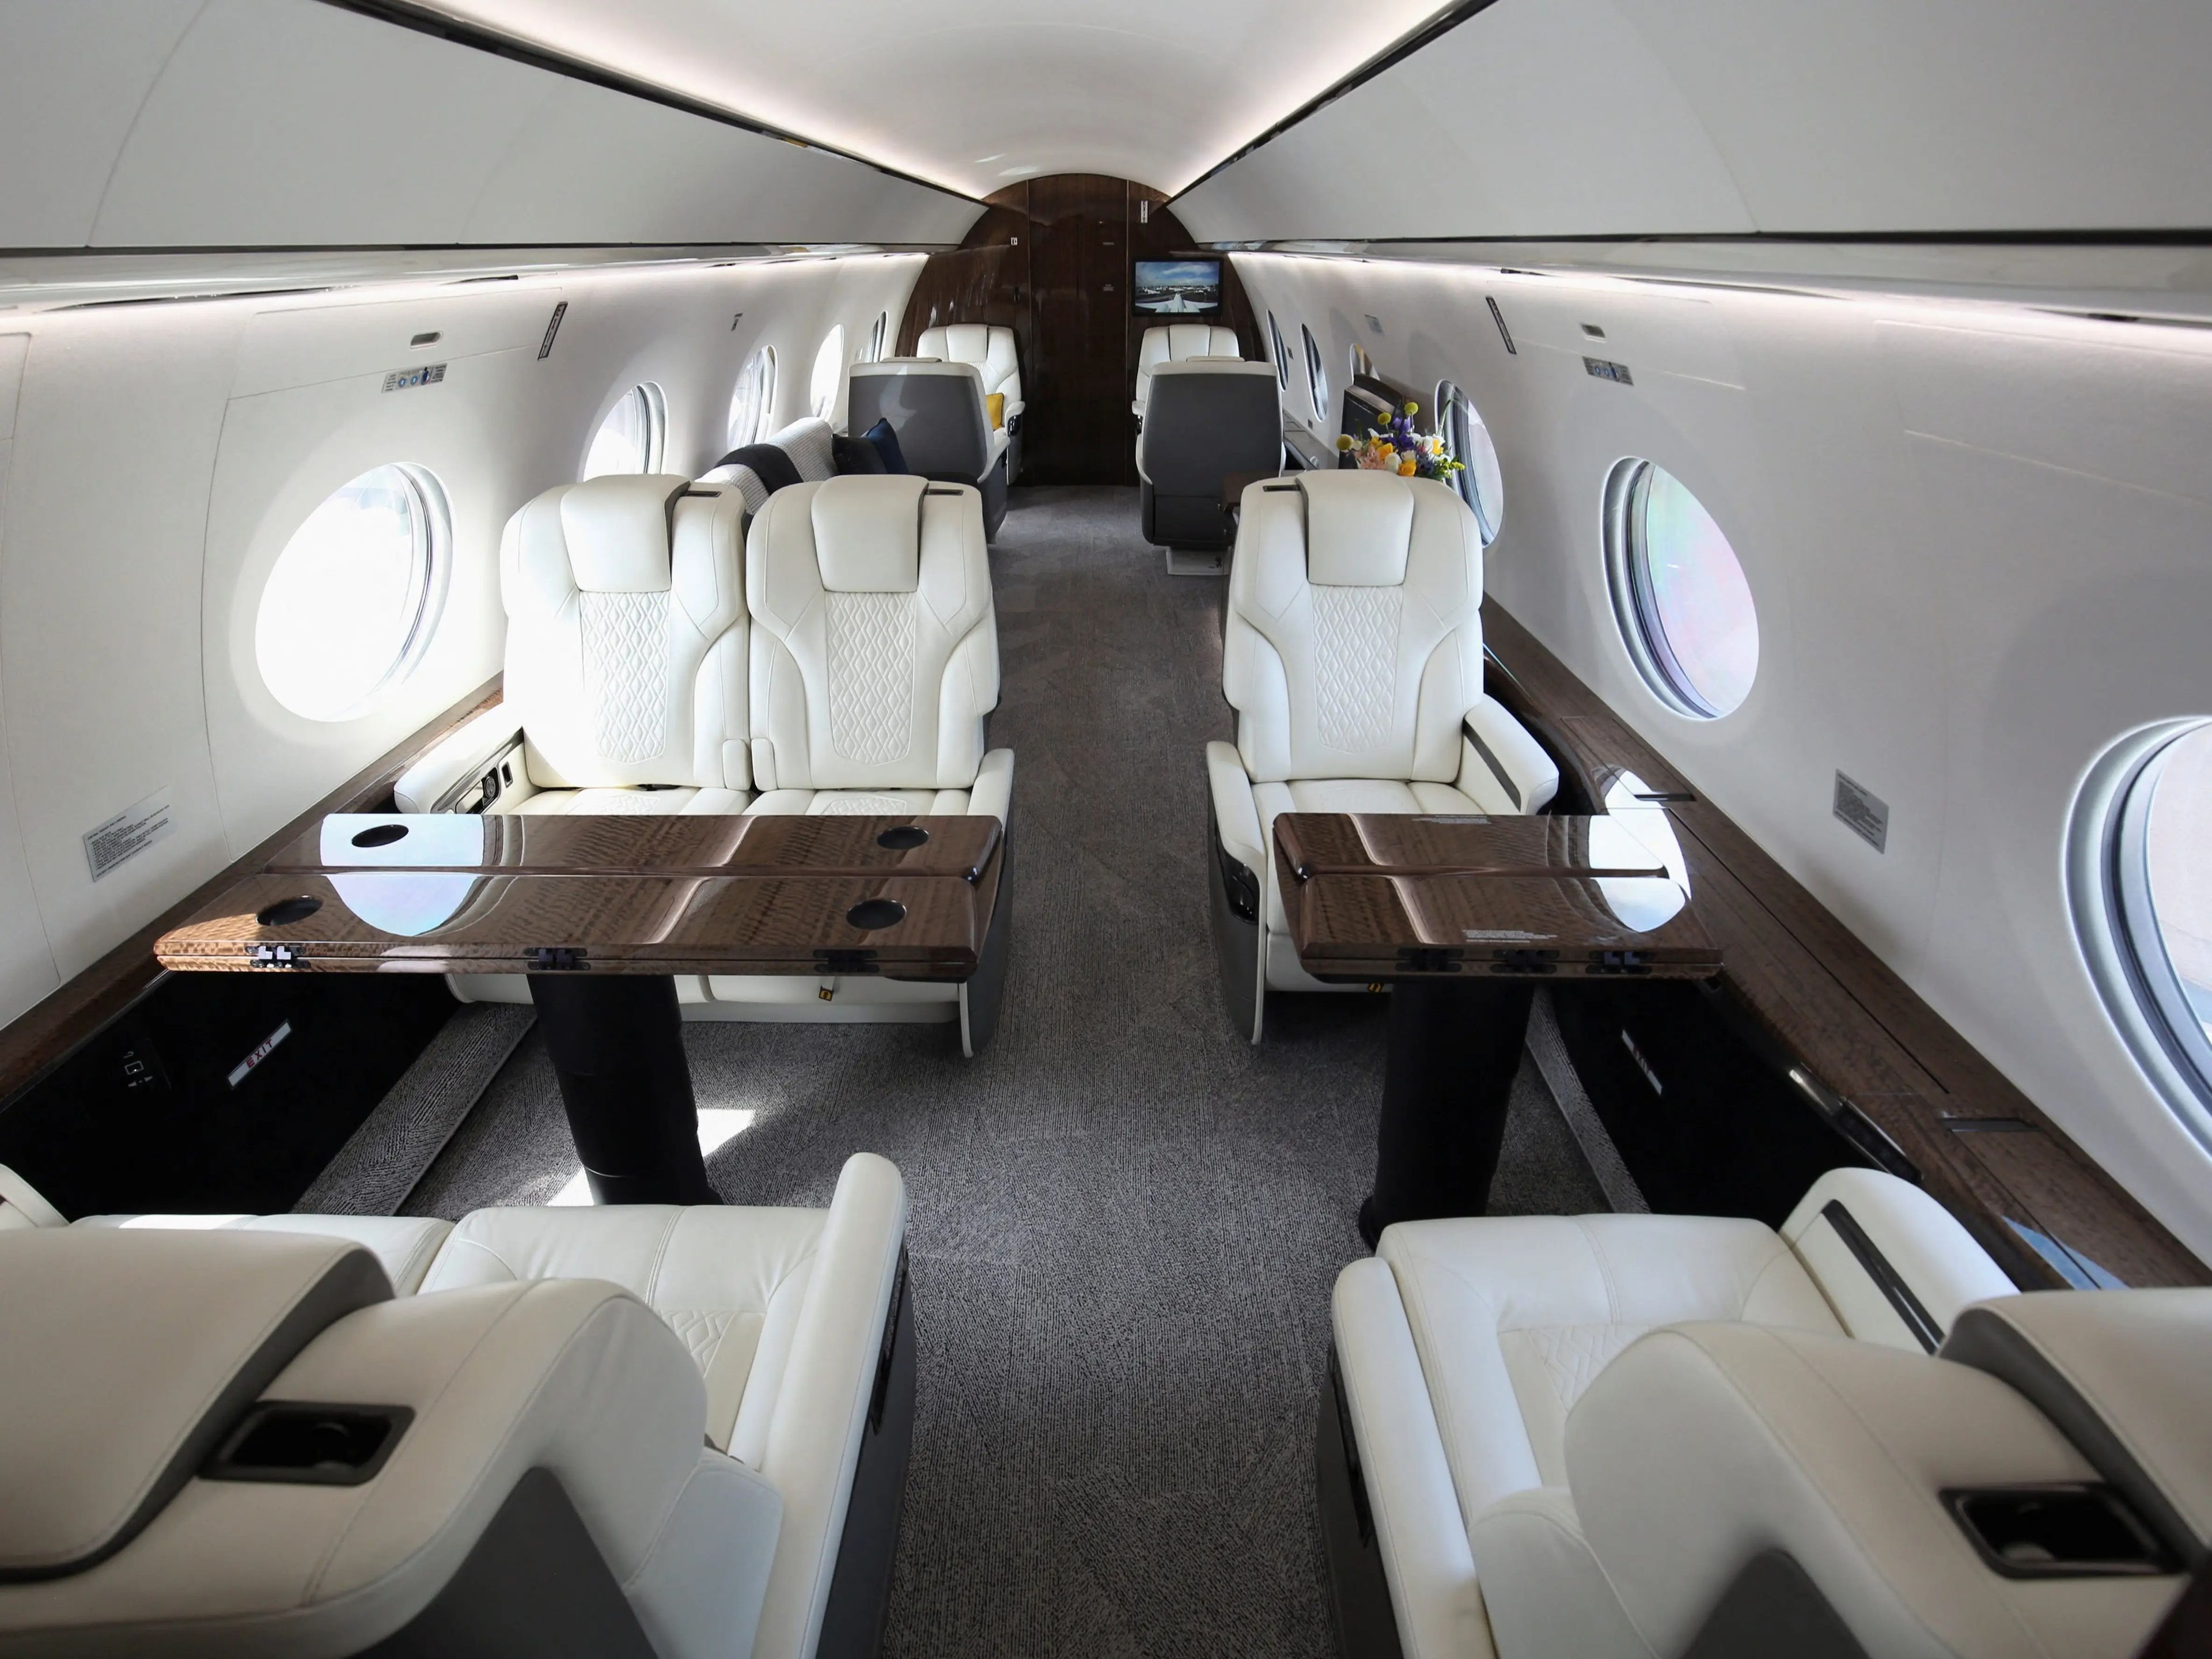 The interior of a G700 aircraft, one of the newest in Gulfstream Aerospace's lineup, is on display at the National Business Aviation Association (NBAA) convention and exhibition in Orlando, Florida, U.S. October 17, 2022.